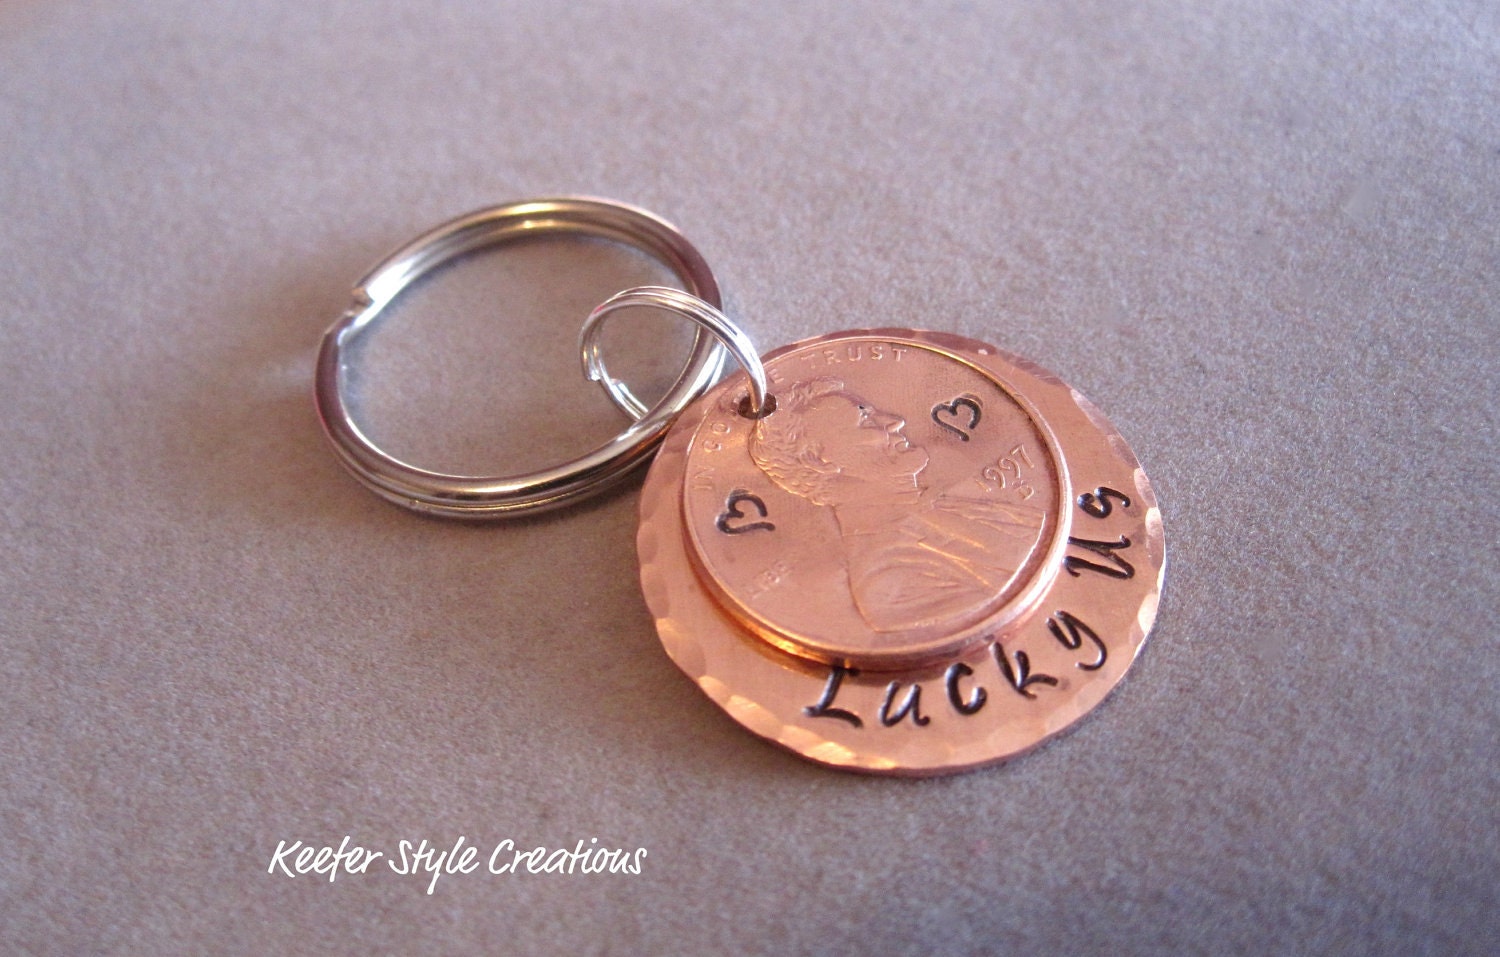 Keychain-Copper Lucky Us with Penny added - KeeferStyleCreations